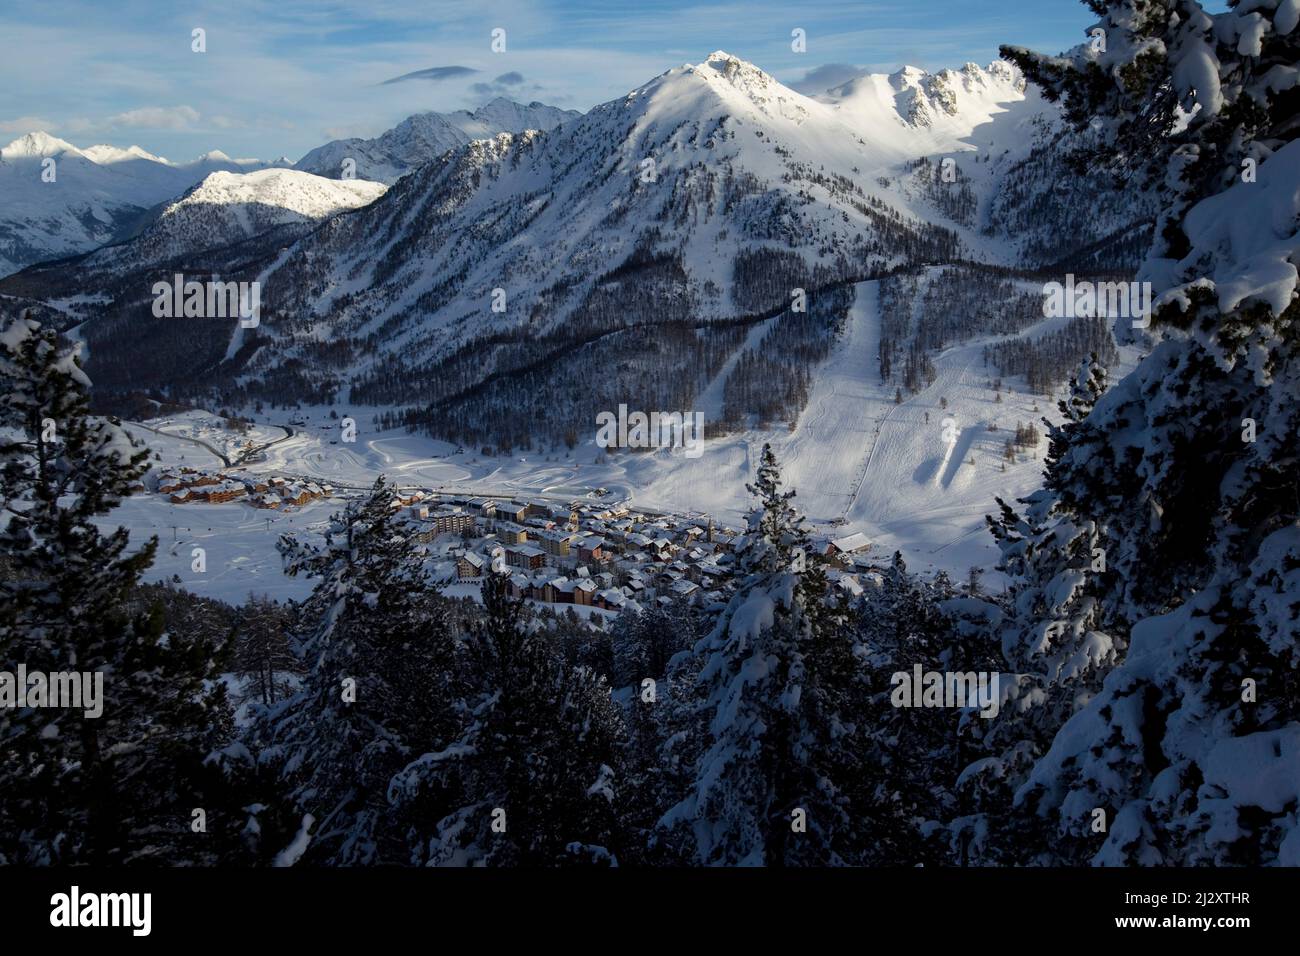 Montgenevre (French Alp, south-eastern France): overview of the ski resort covered in snow in winter Stock Photo